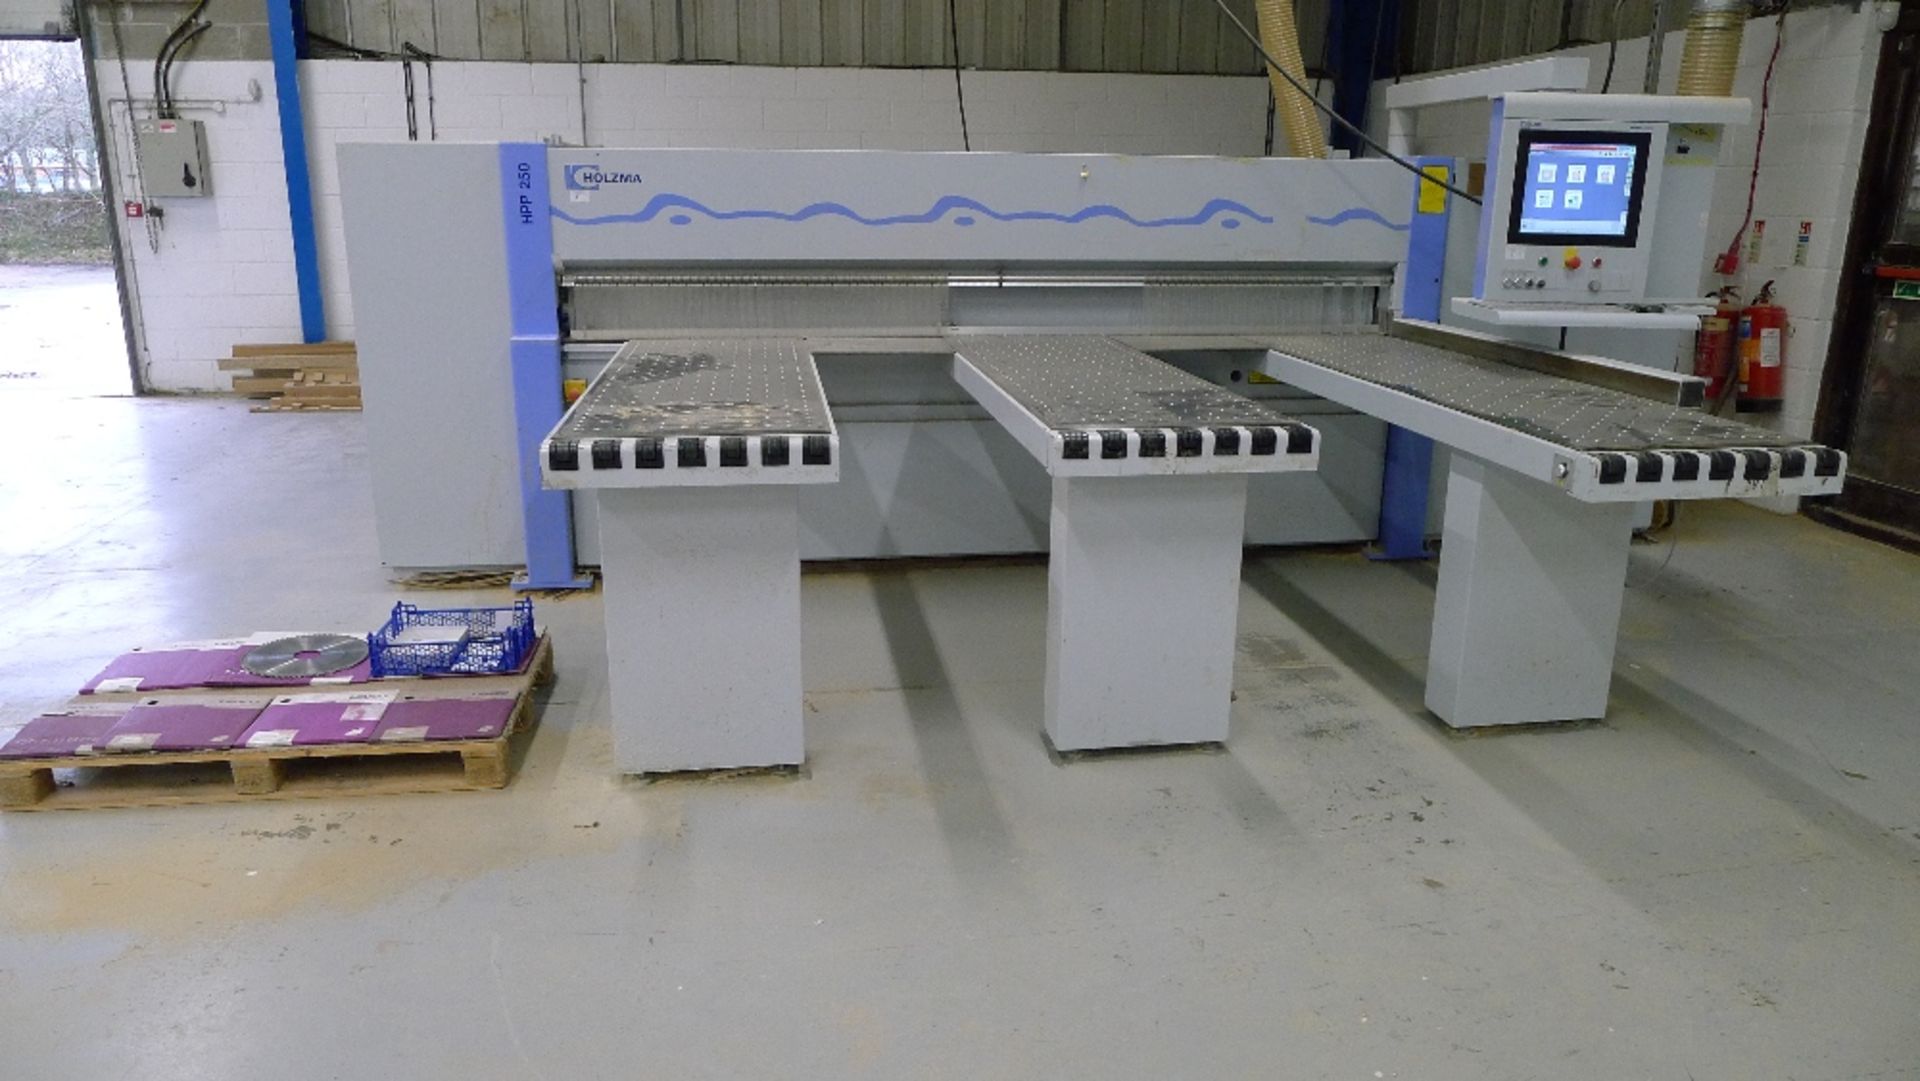 1 CNC Horizontal panel saw with pressure beam by Holzma type Optimat HPP 250/31/31, s/n 0-341-07- - Image 3 of 11